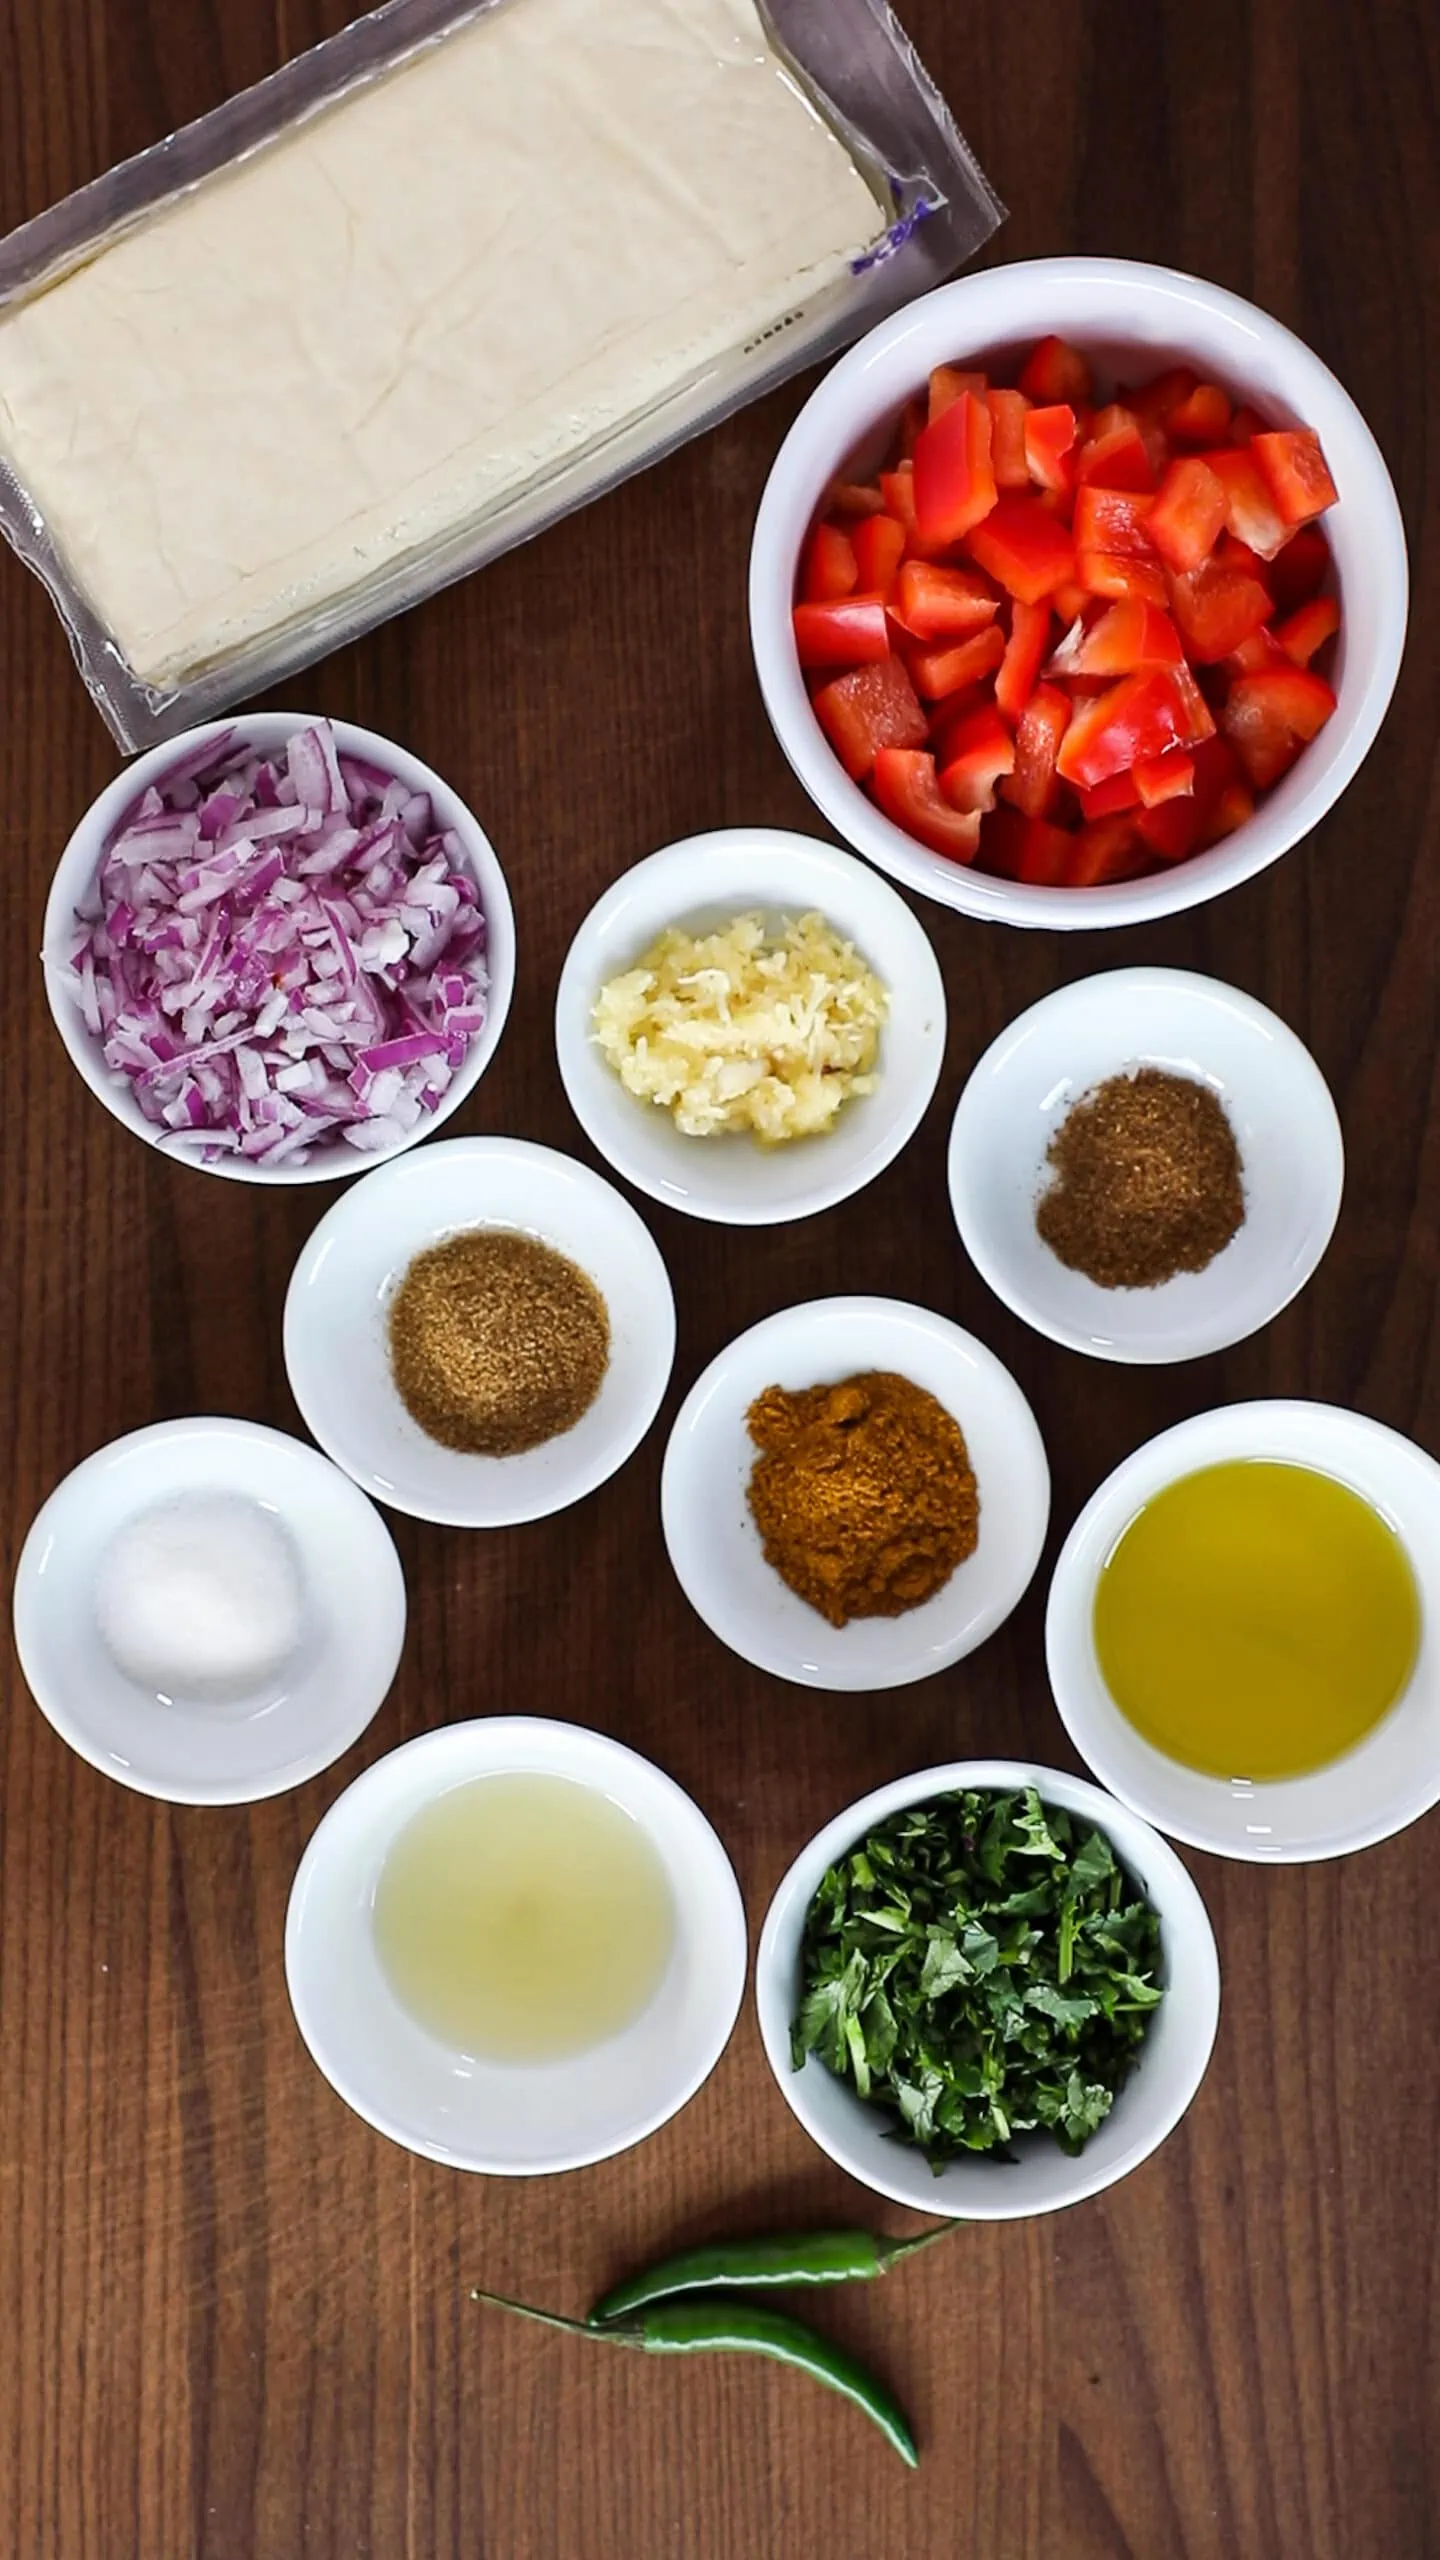 A selection of food ingredients (vegetables and spices) in ramekins on top of a wooden board.